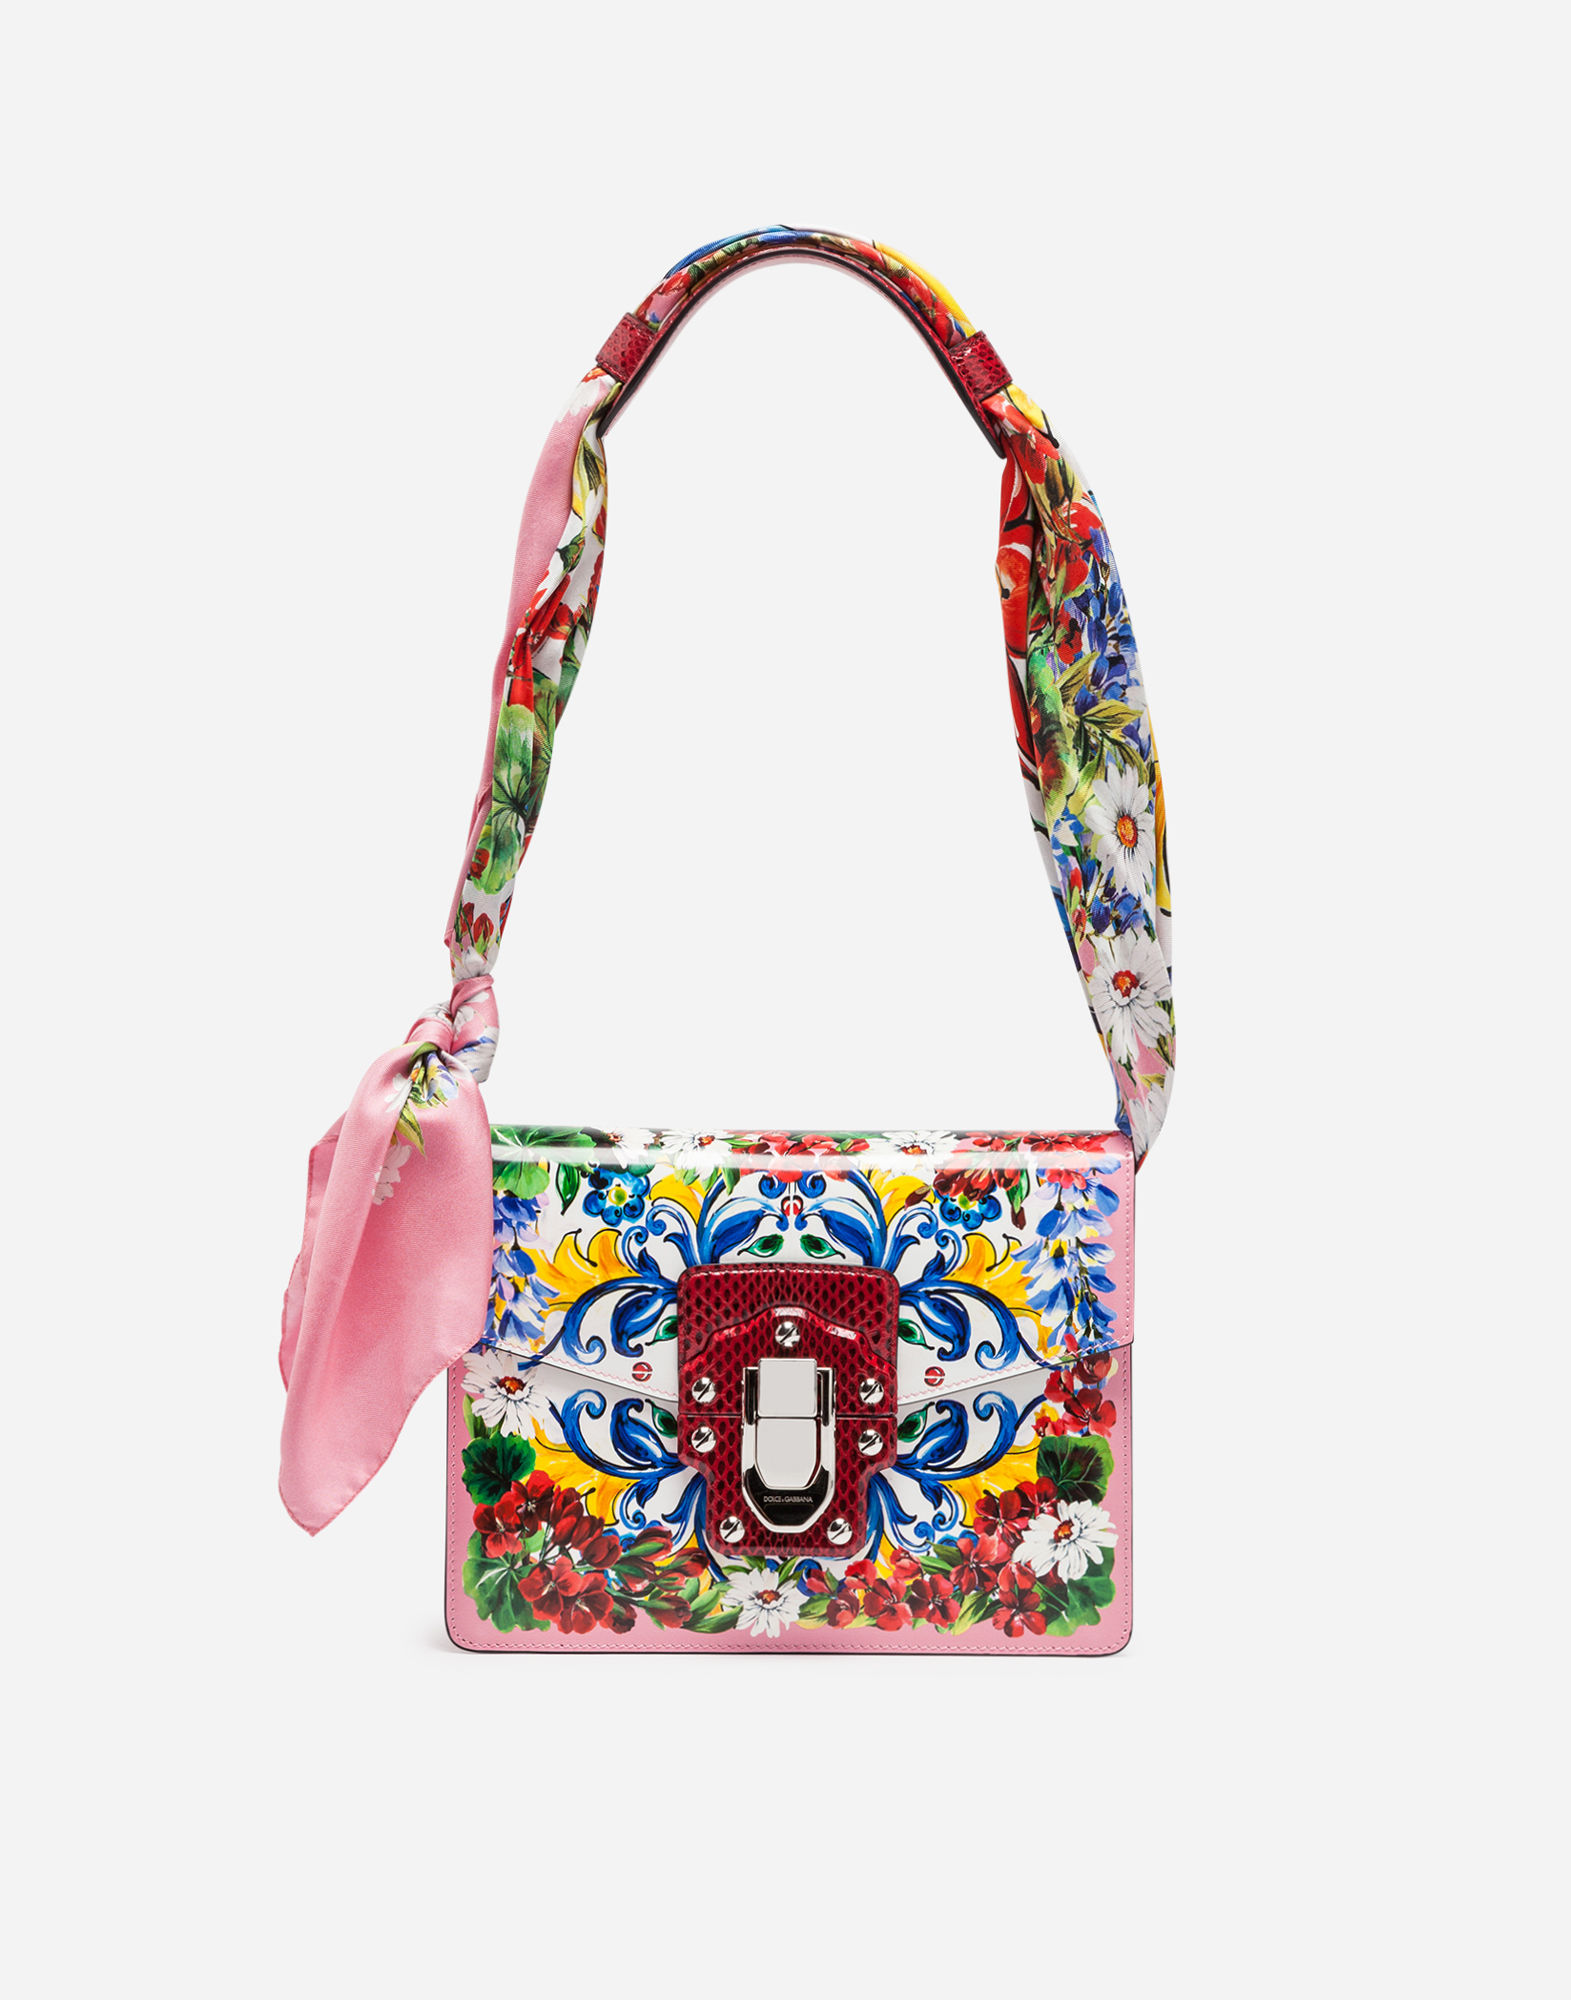 Dolce & Gabbana Printed Leather And Ayers Lucia Shoulder Bag In ...